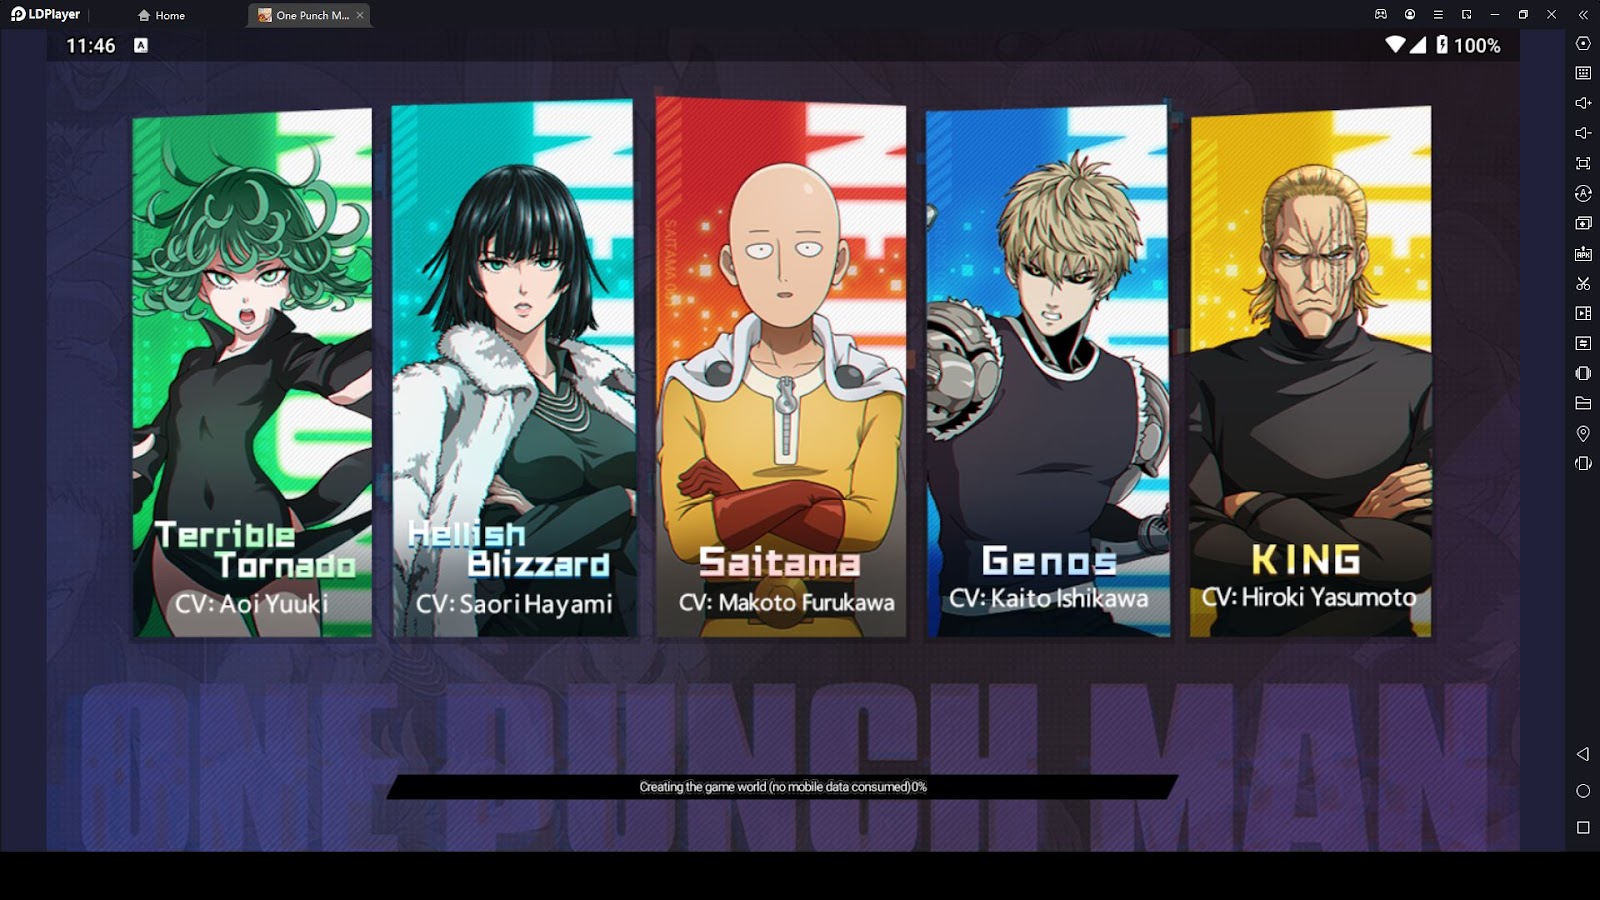 Recommend Heroes for One Punch Man: The Strongest Reroll